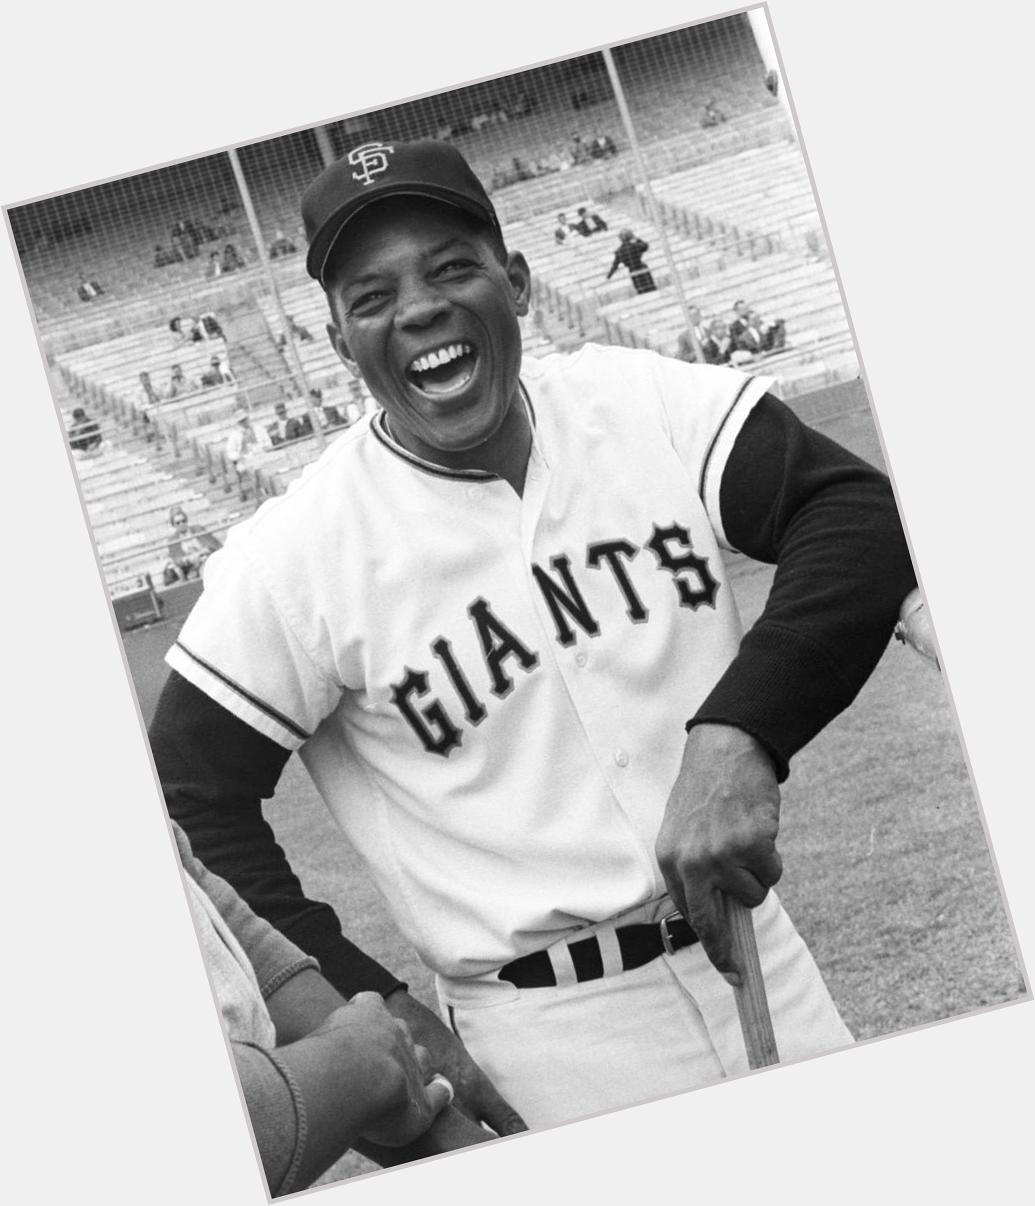 Happy birthday to one of the greats, Willie Mays!  